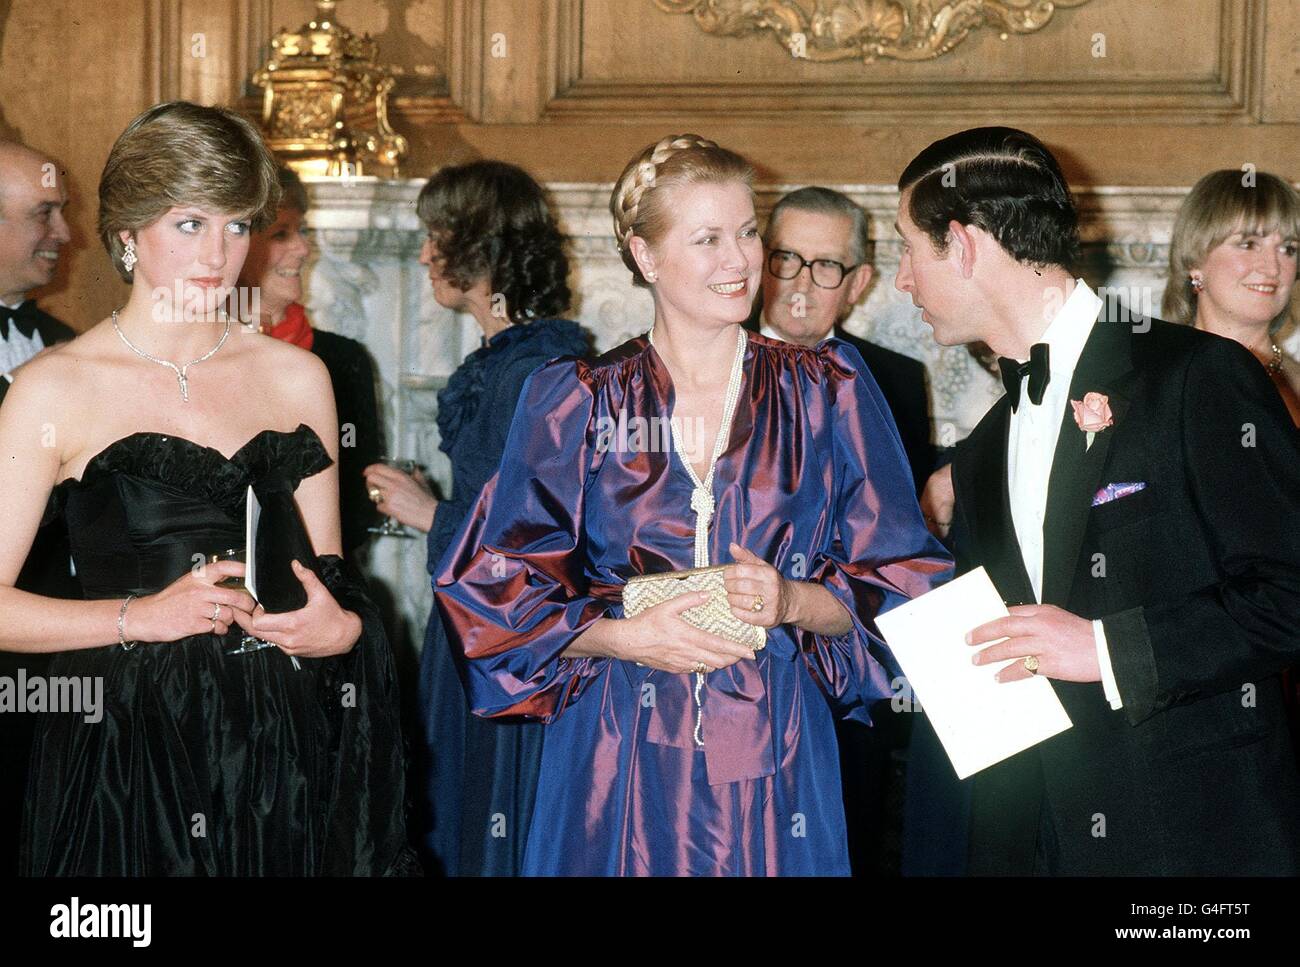 14/09/1982 - ON THIS DAY IN 1982 - Princess Grace of Monaco, the former American Actress, Grace Kelly, was killed in a car crash. PA NEWS PHOTO 9/3/81 THE PRINCESS OF WALES (L) WITH THE PRINCE OF WALES AND PRINCESS GRACE OF MONACO AT THE GOLDSMITH'S HALL IN LONDON AS GUESTS AT AN ENTERTAINMENT IN AID OF THE ROYAL OPERA HOUSE DEVELOPMENT APPEAL. Stock Photo